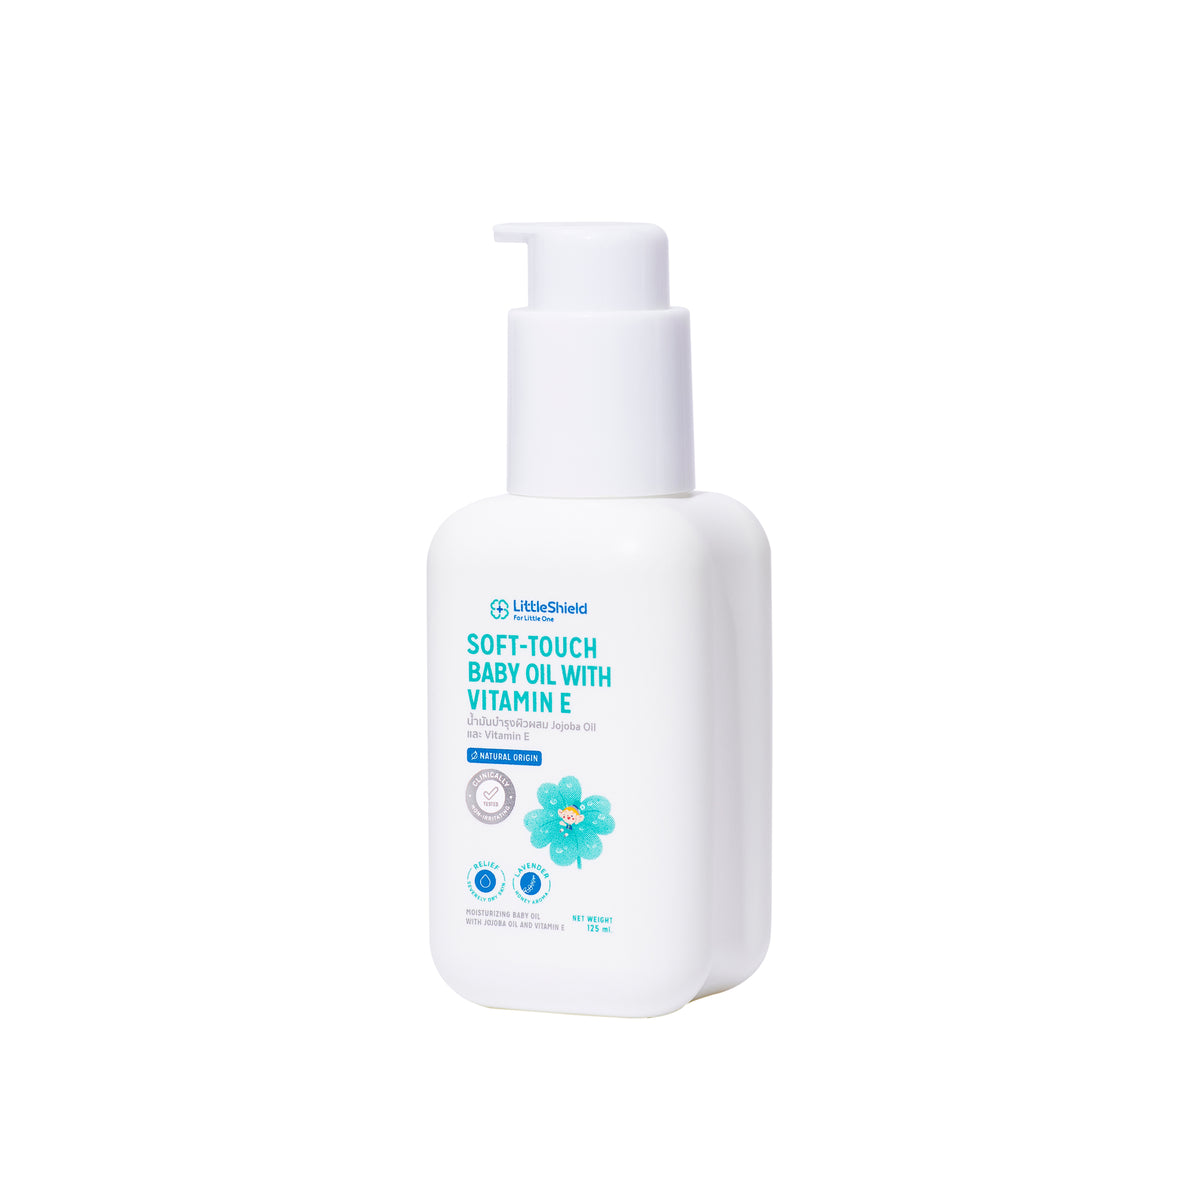 Little Shield Soft-Touch Baby Oil With Vitamin E 125ml